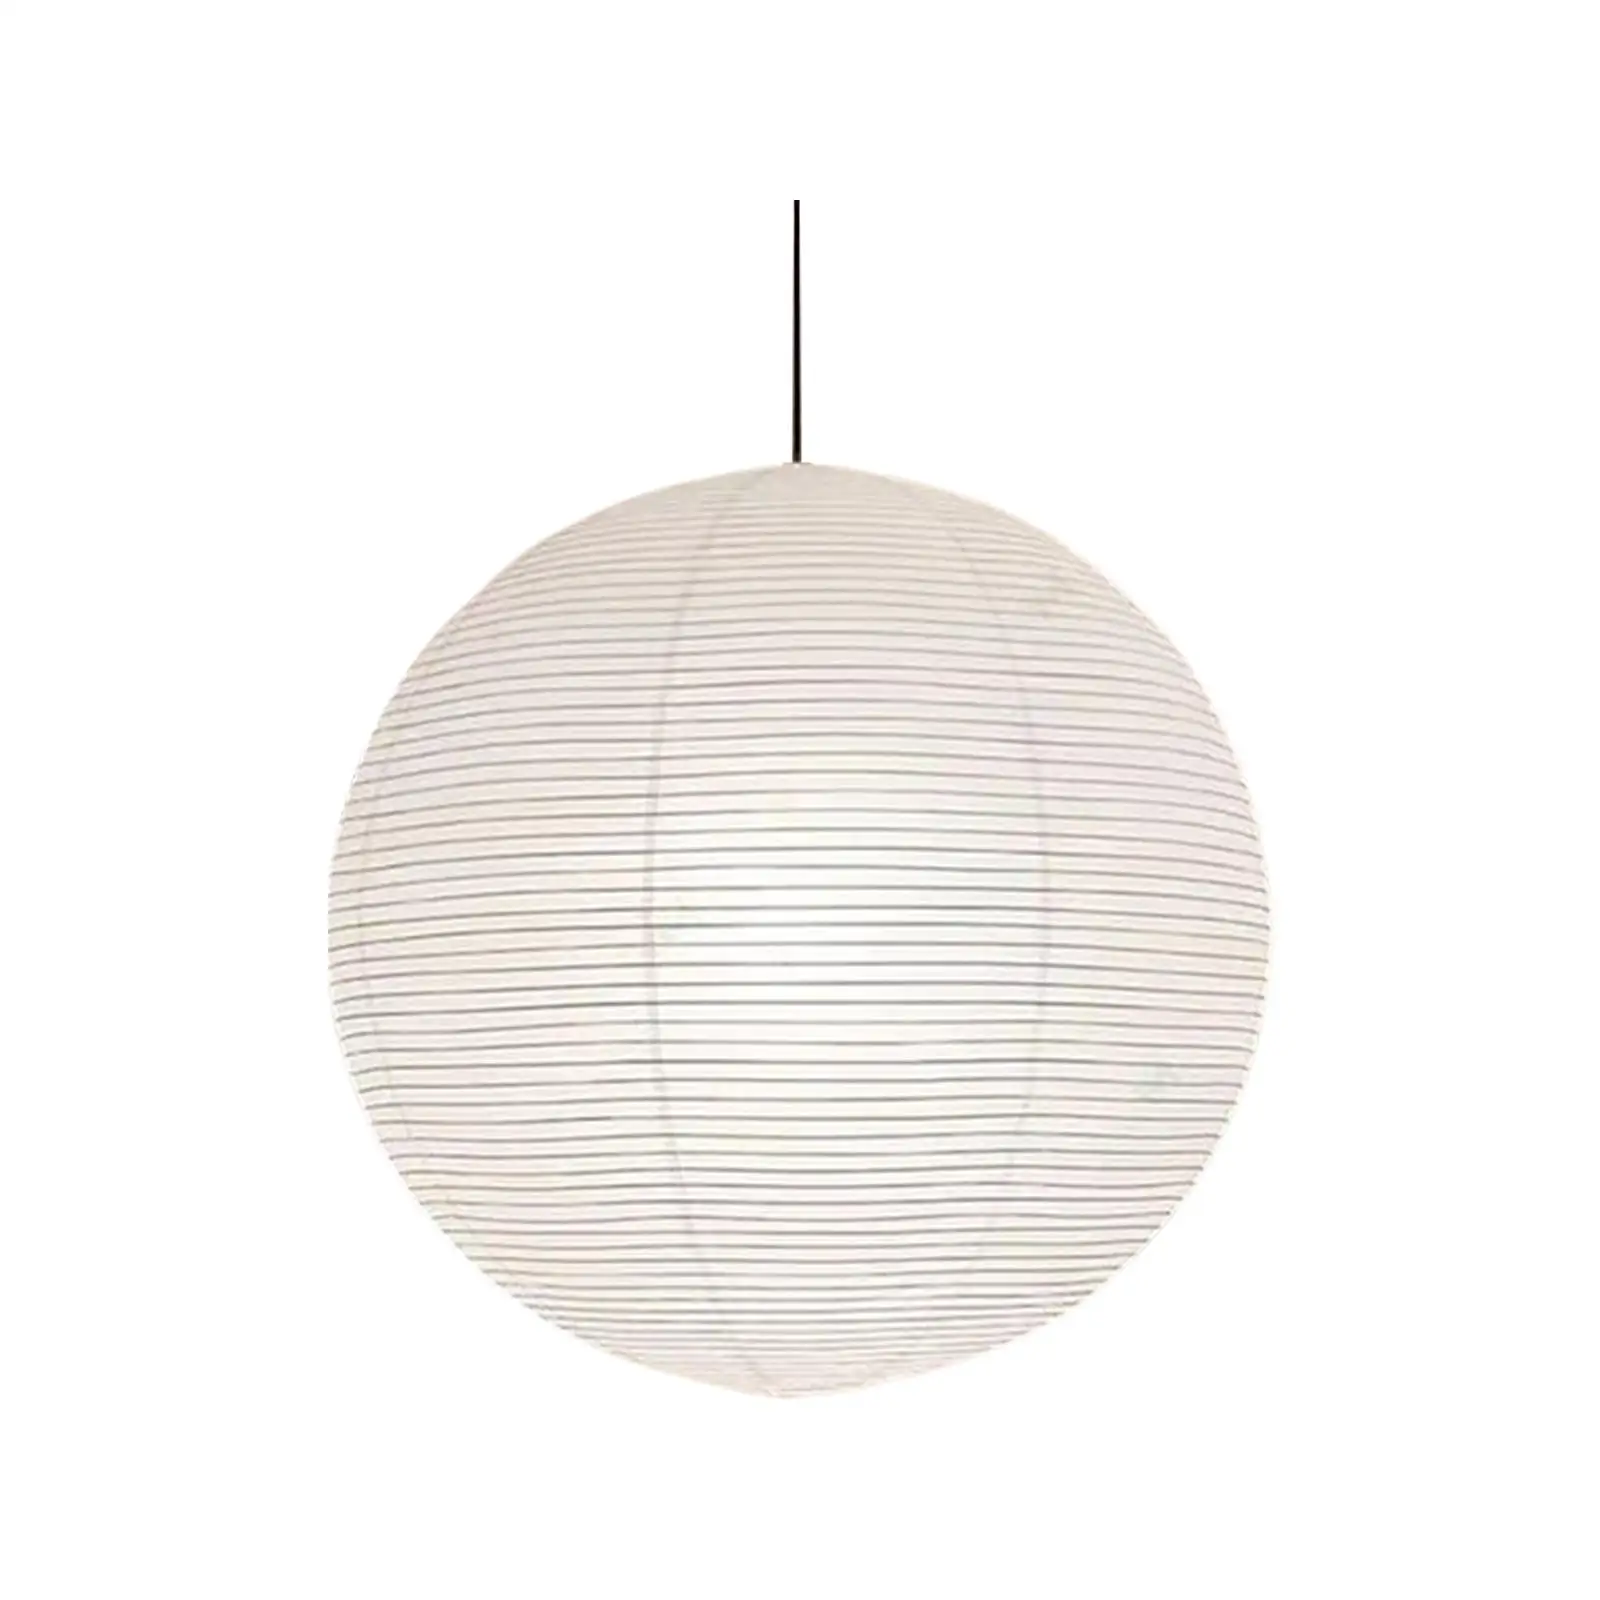 Round Paper Lampshade, Lighting Fixtures Cover for Home Dining Room Living Room Cafe